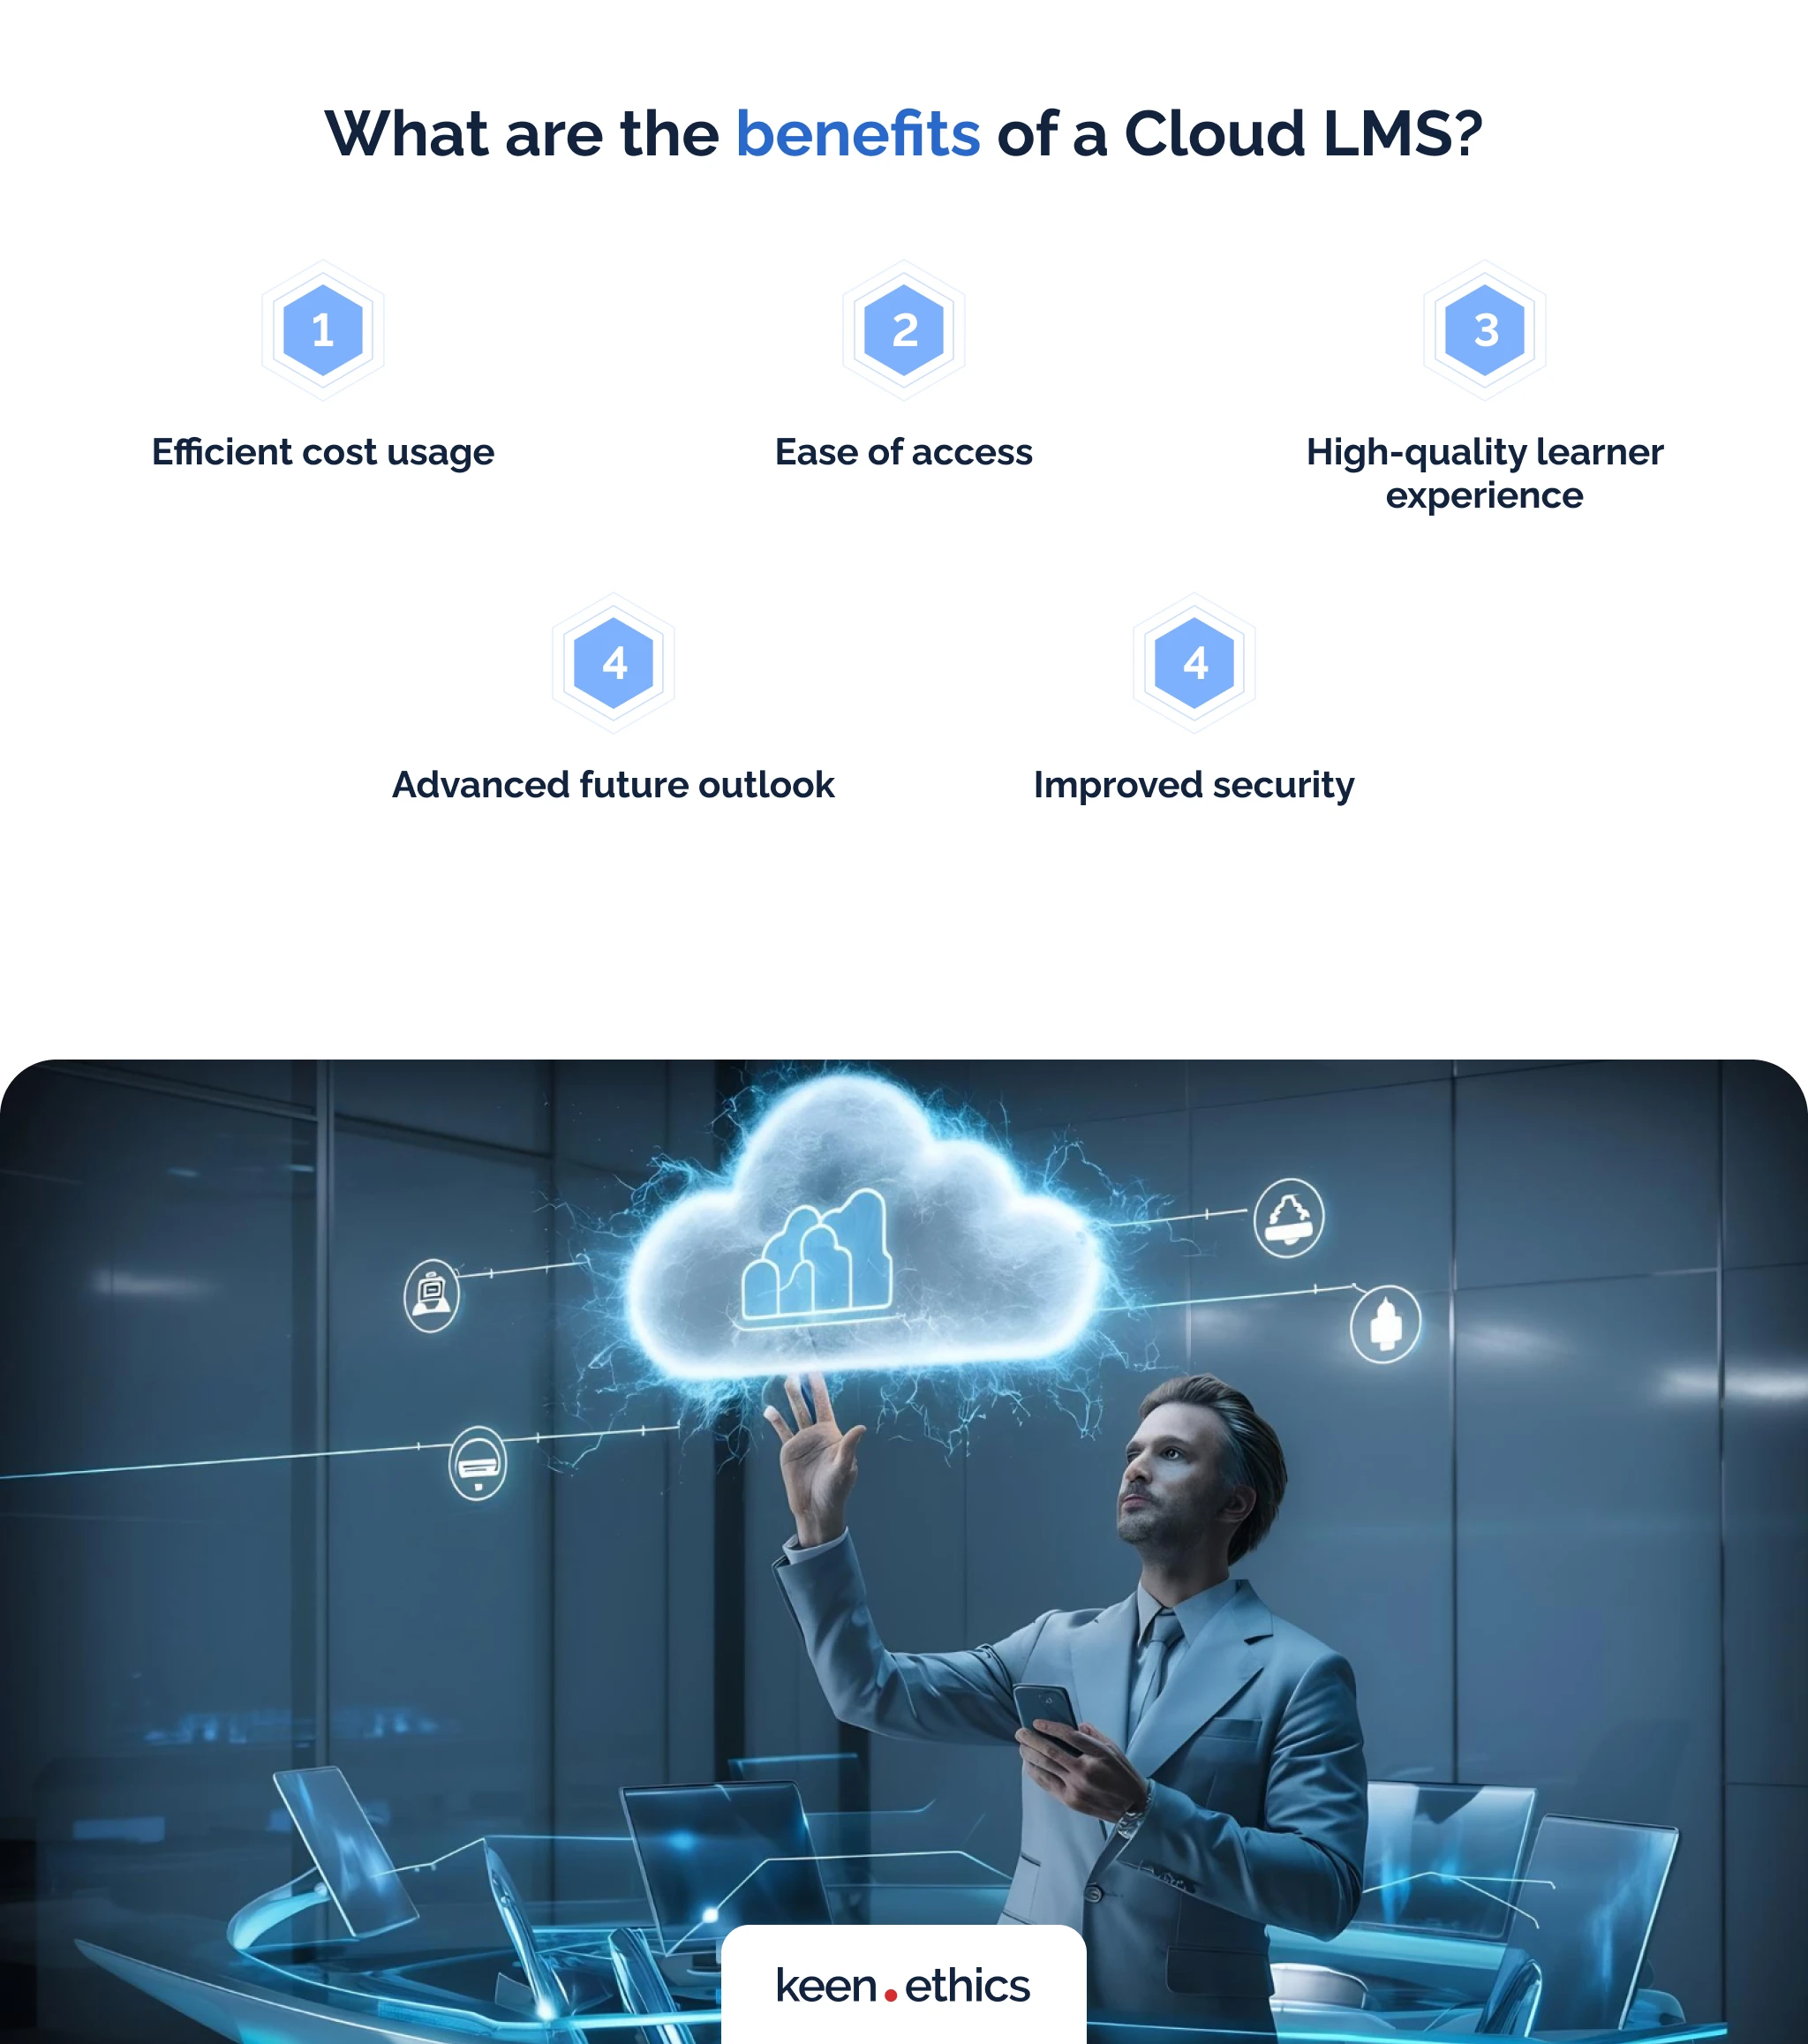 What are the benefits of a cloud LMS?